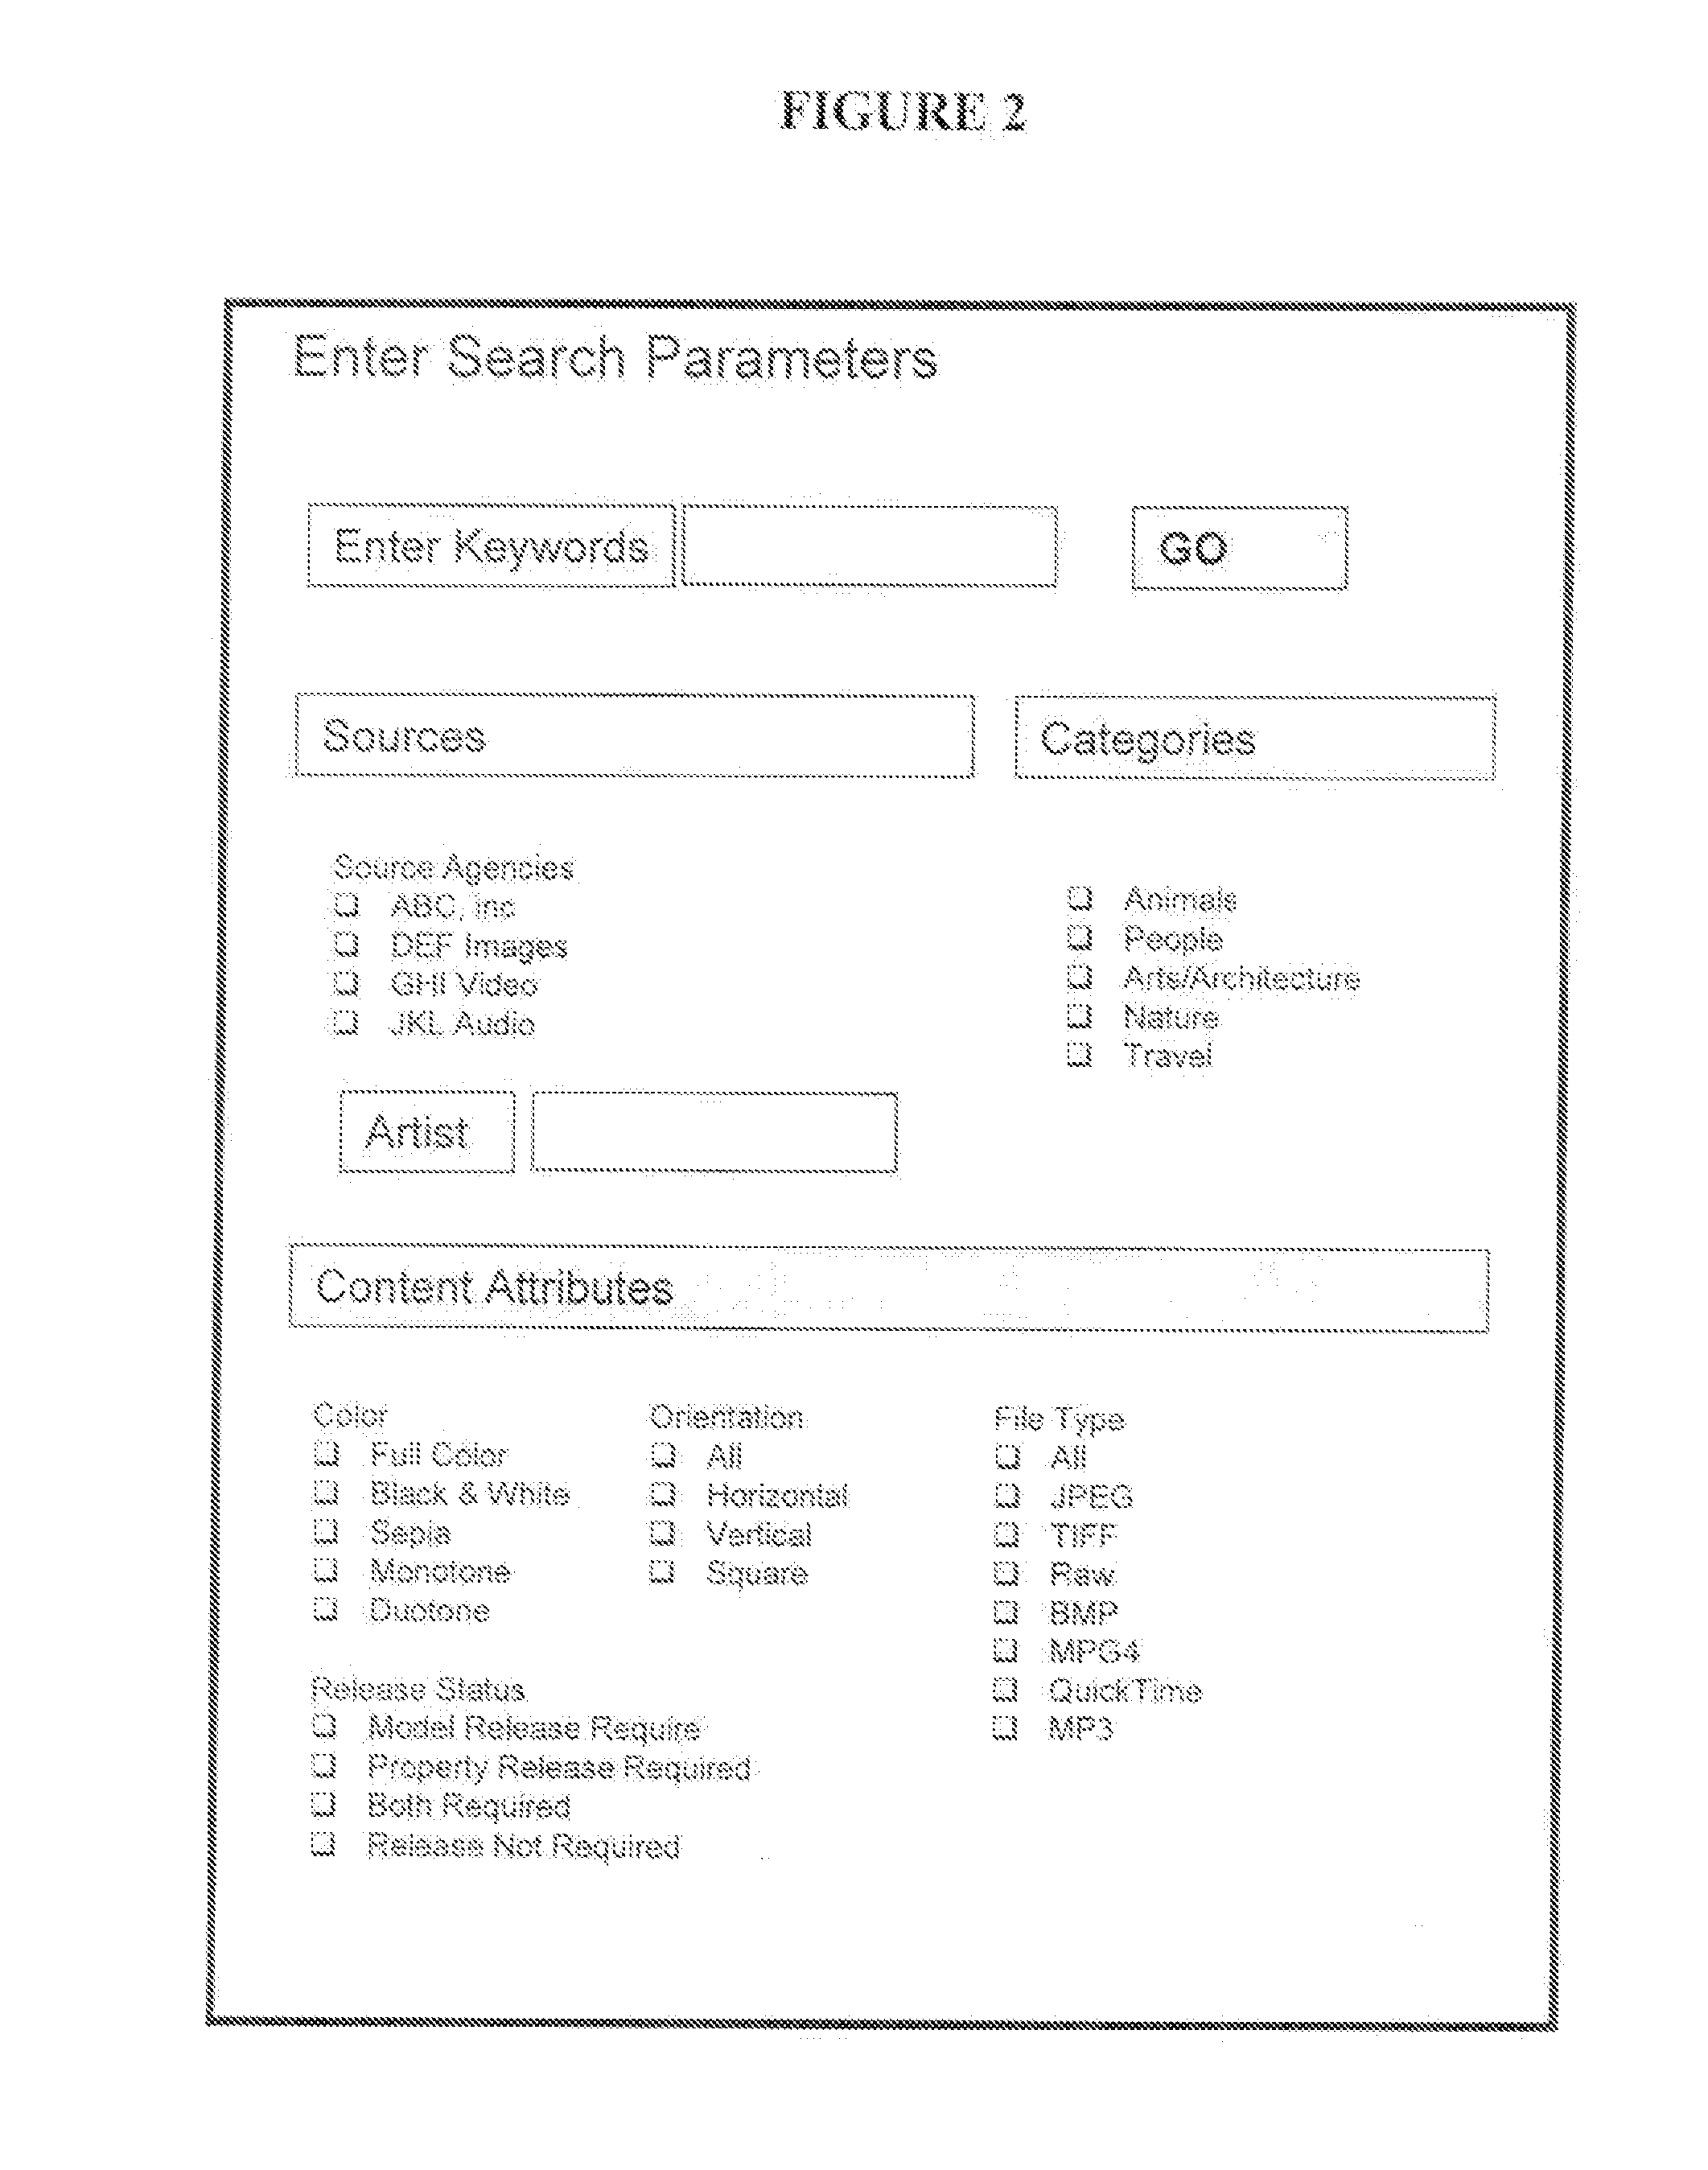 Methods of Creating and Displaying Images in a Dynamic Mosaic